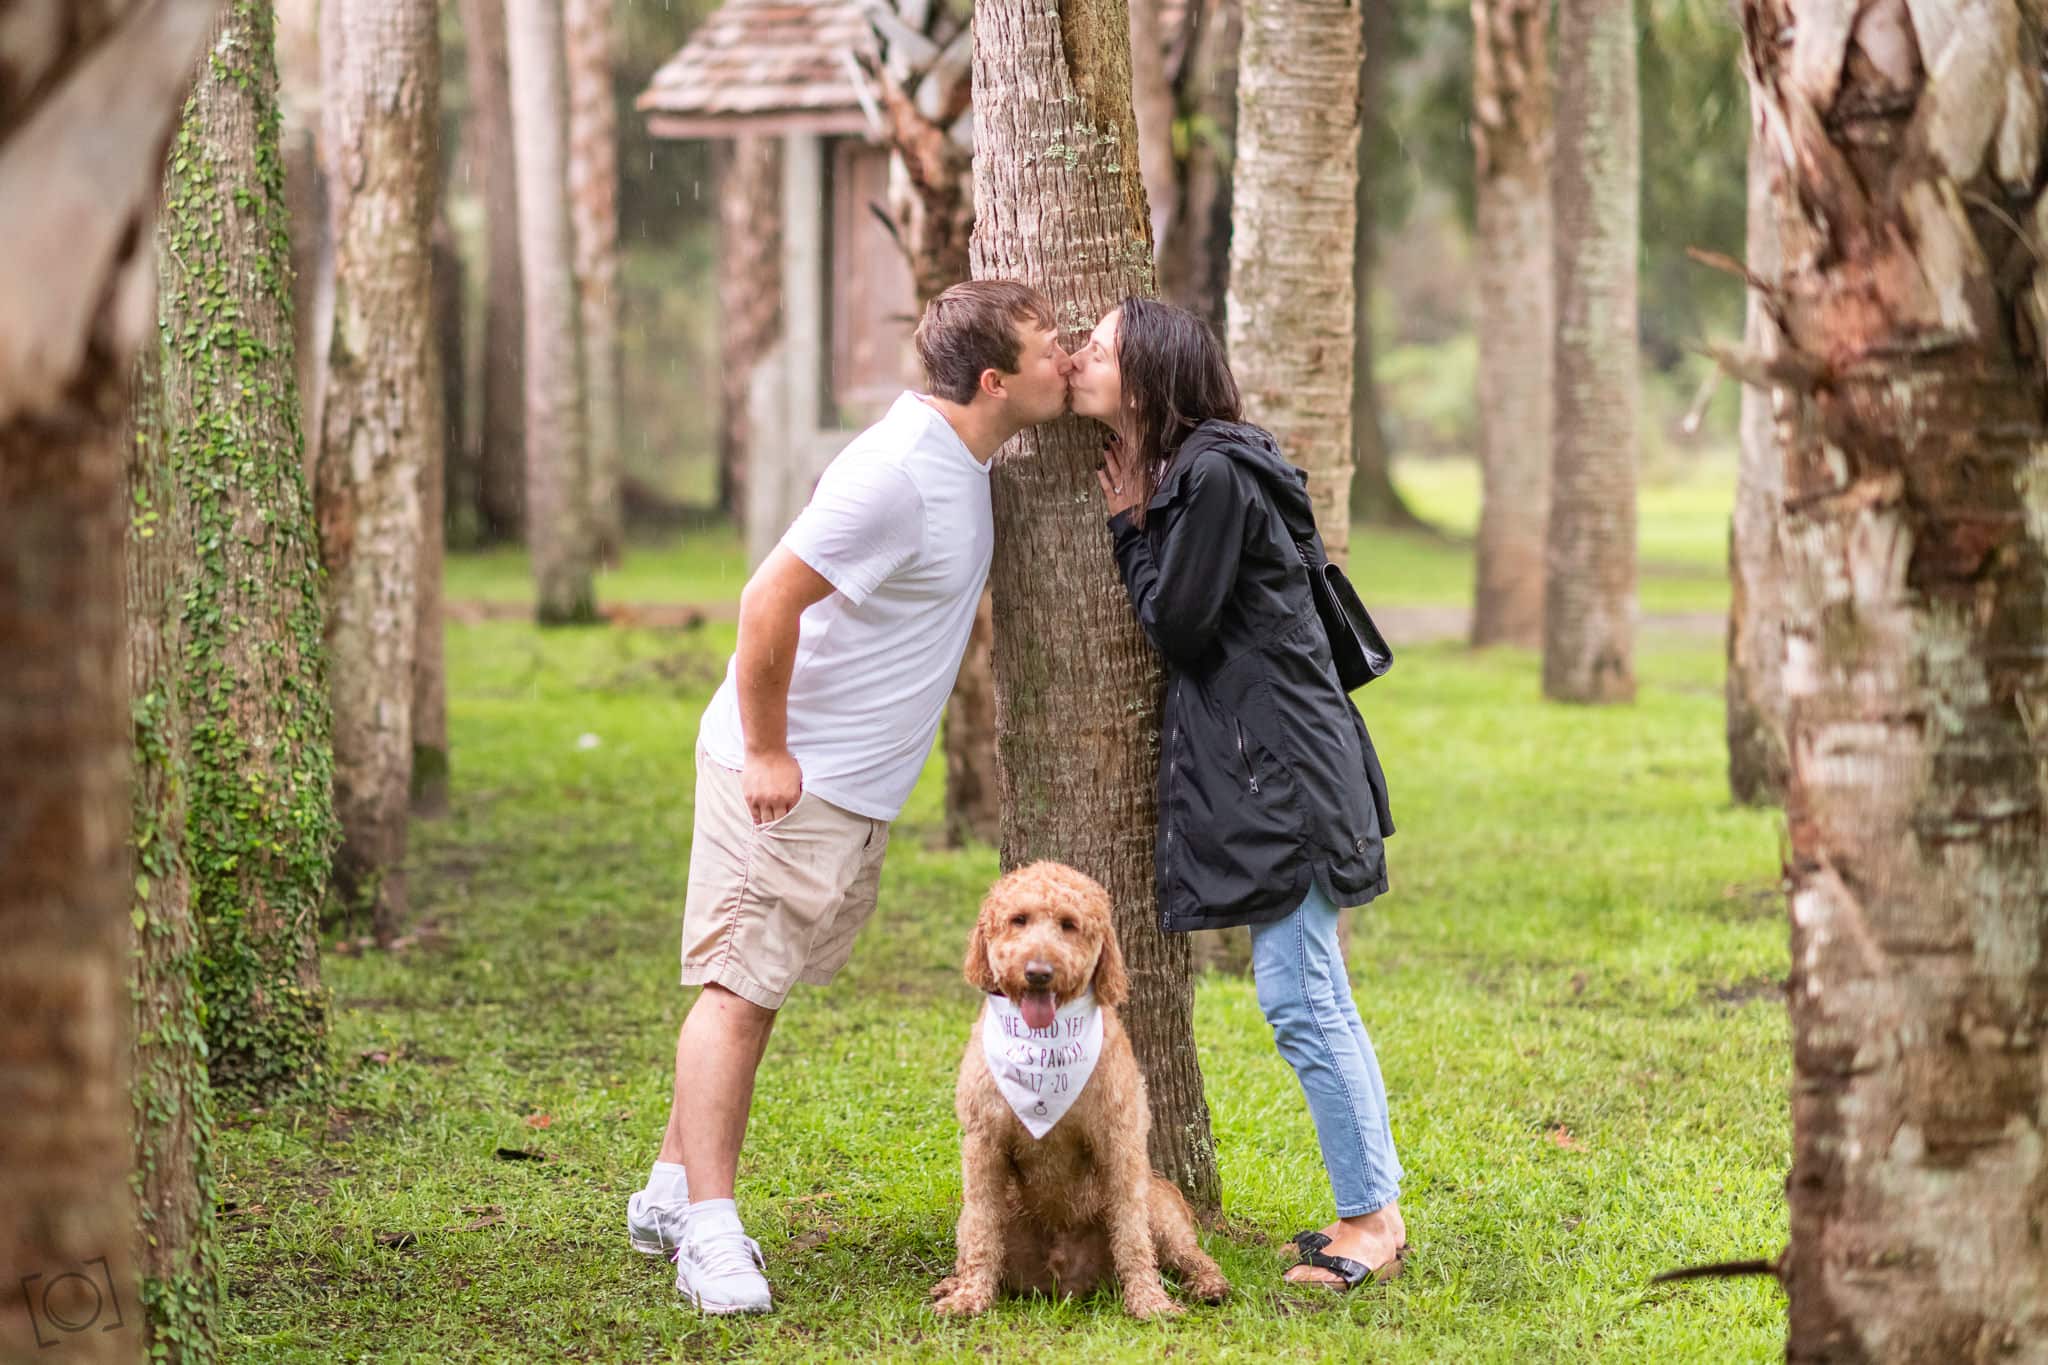 Engagement pictures in the pouring rain with their dog  - Huntington Beach State Park